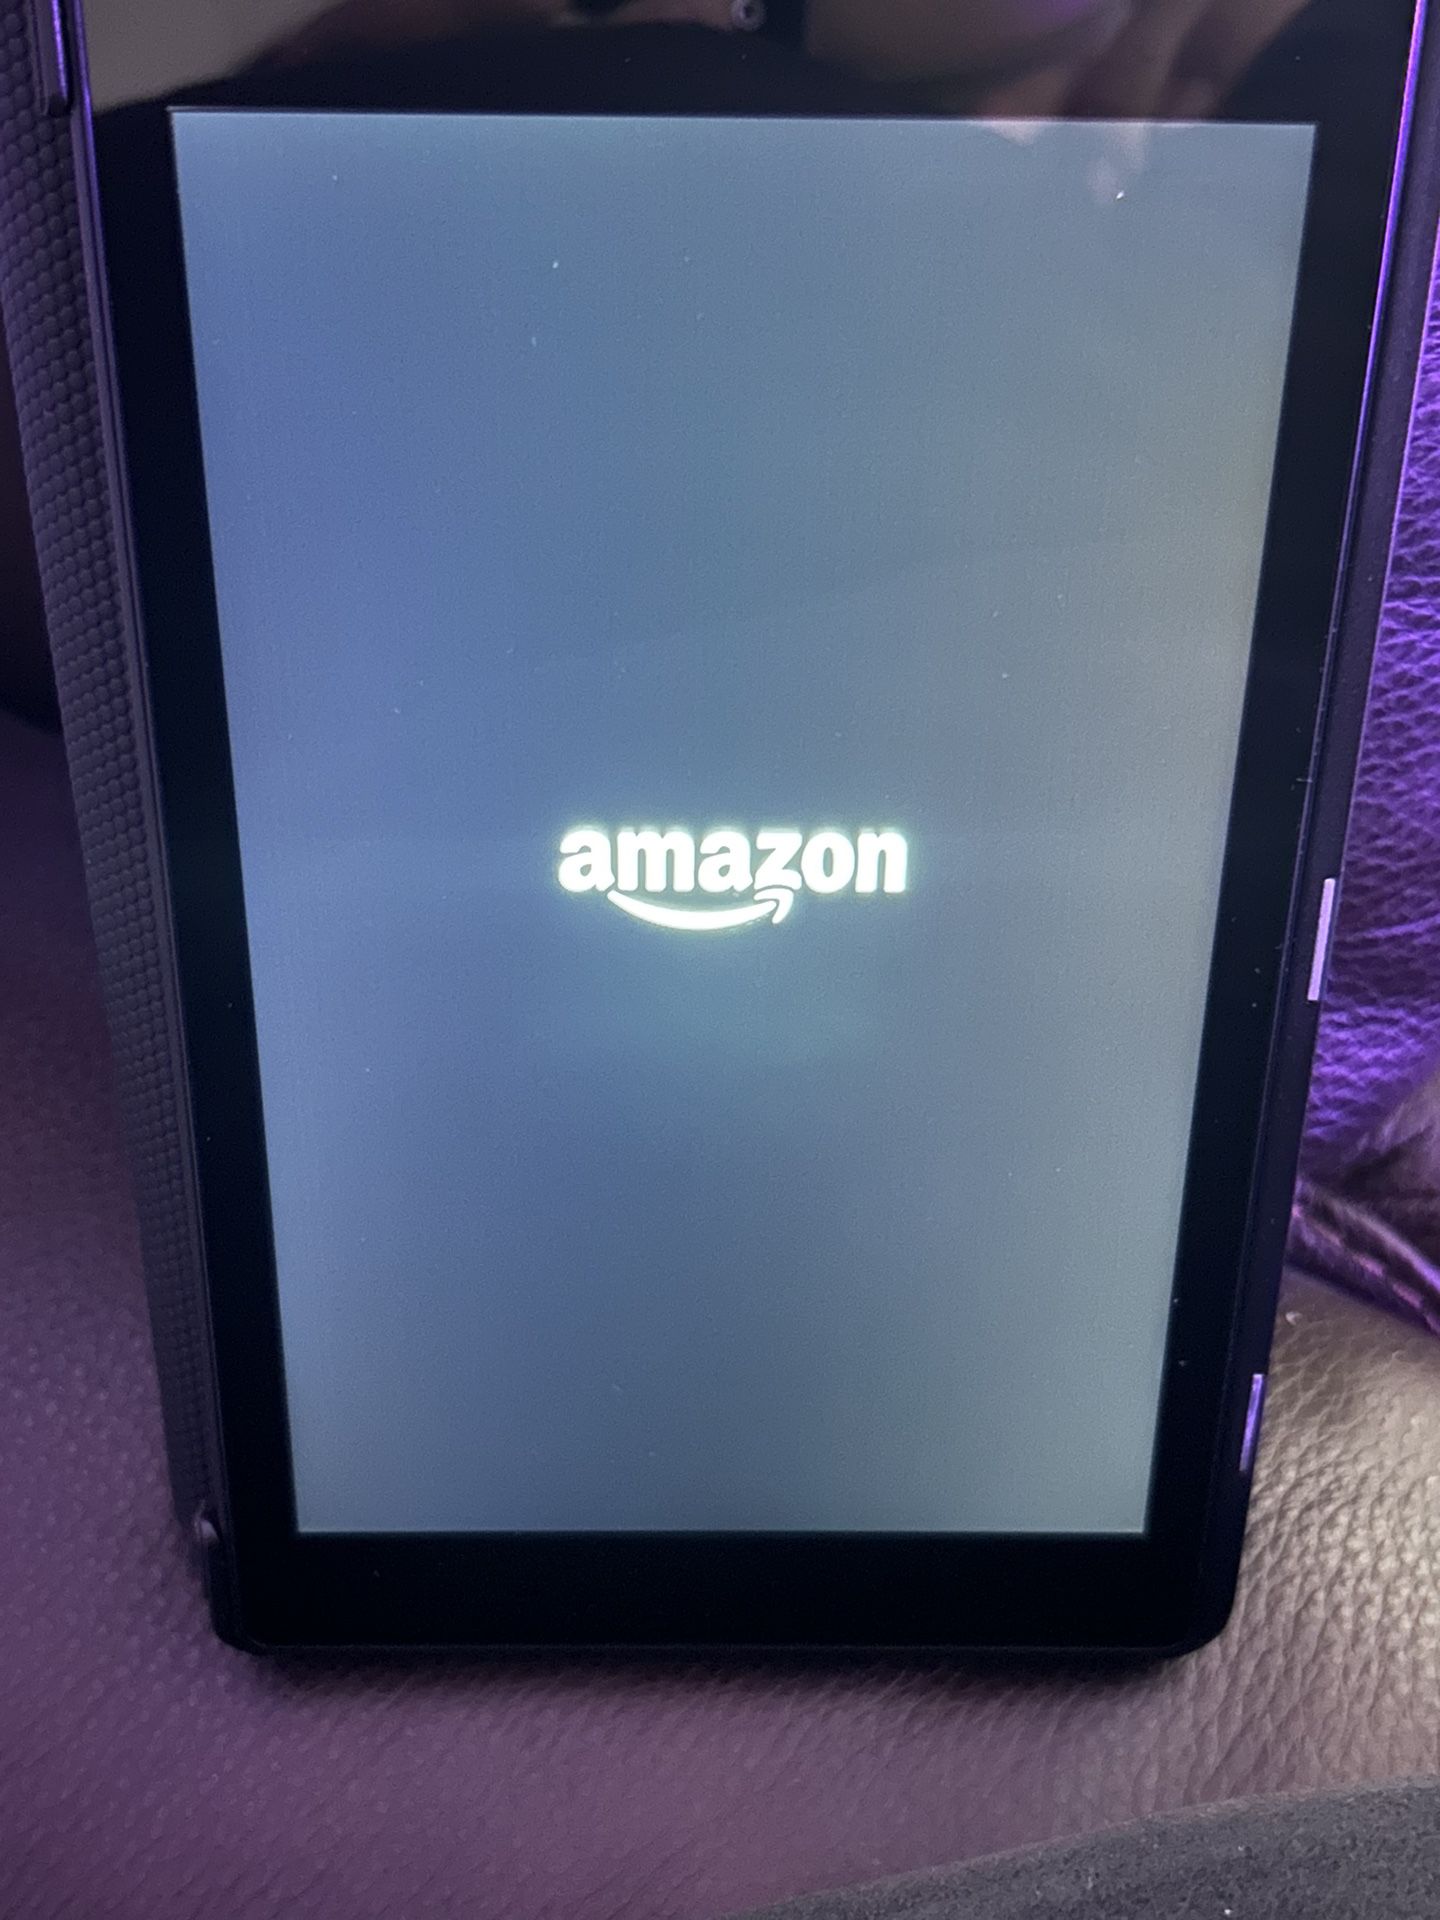 Amazon Fire Tablet 8th Gen (Used)